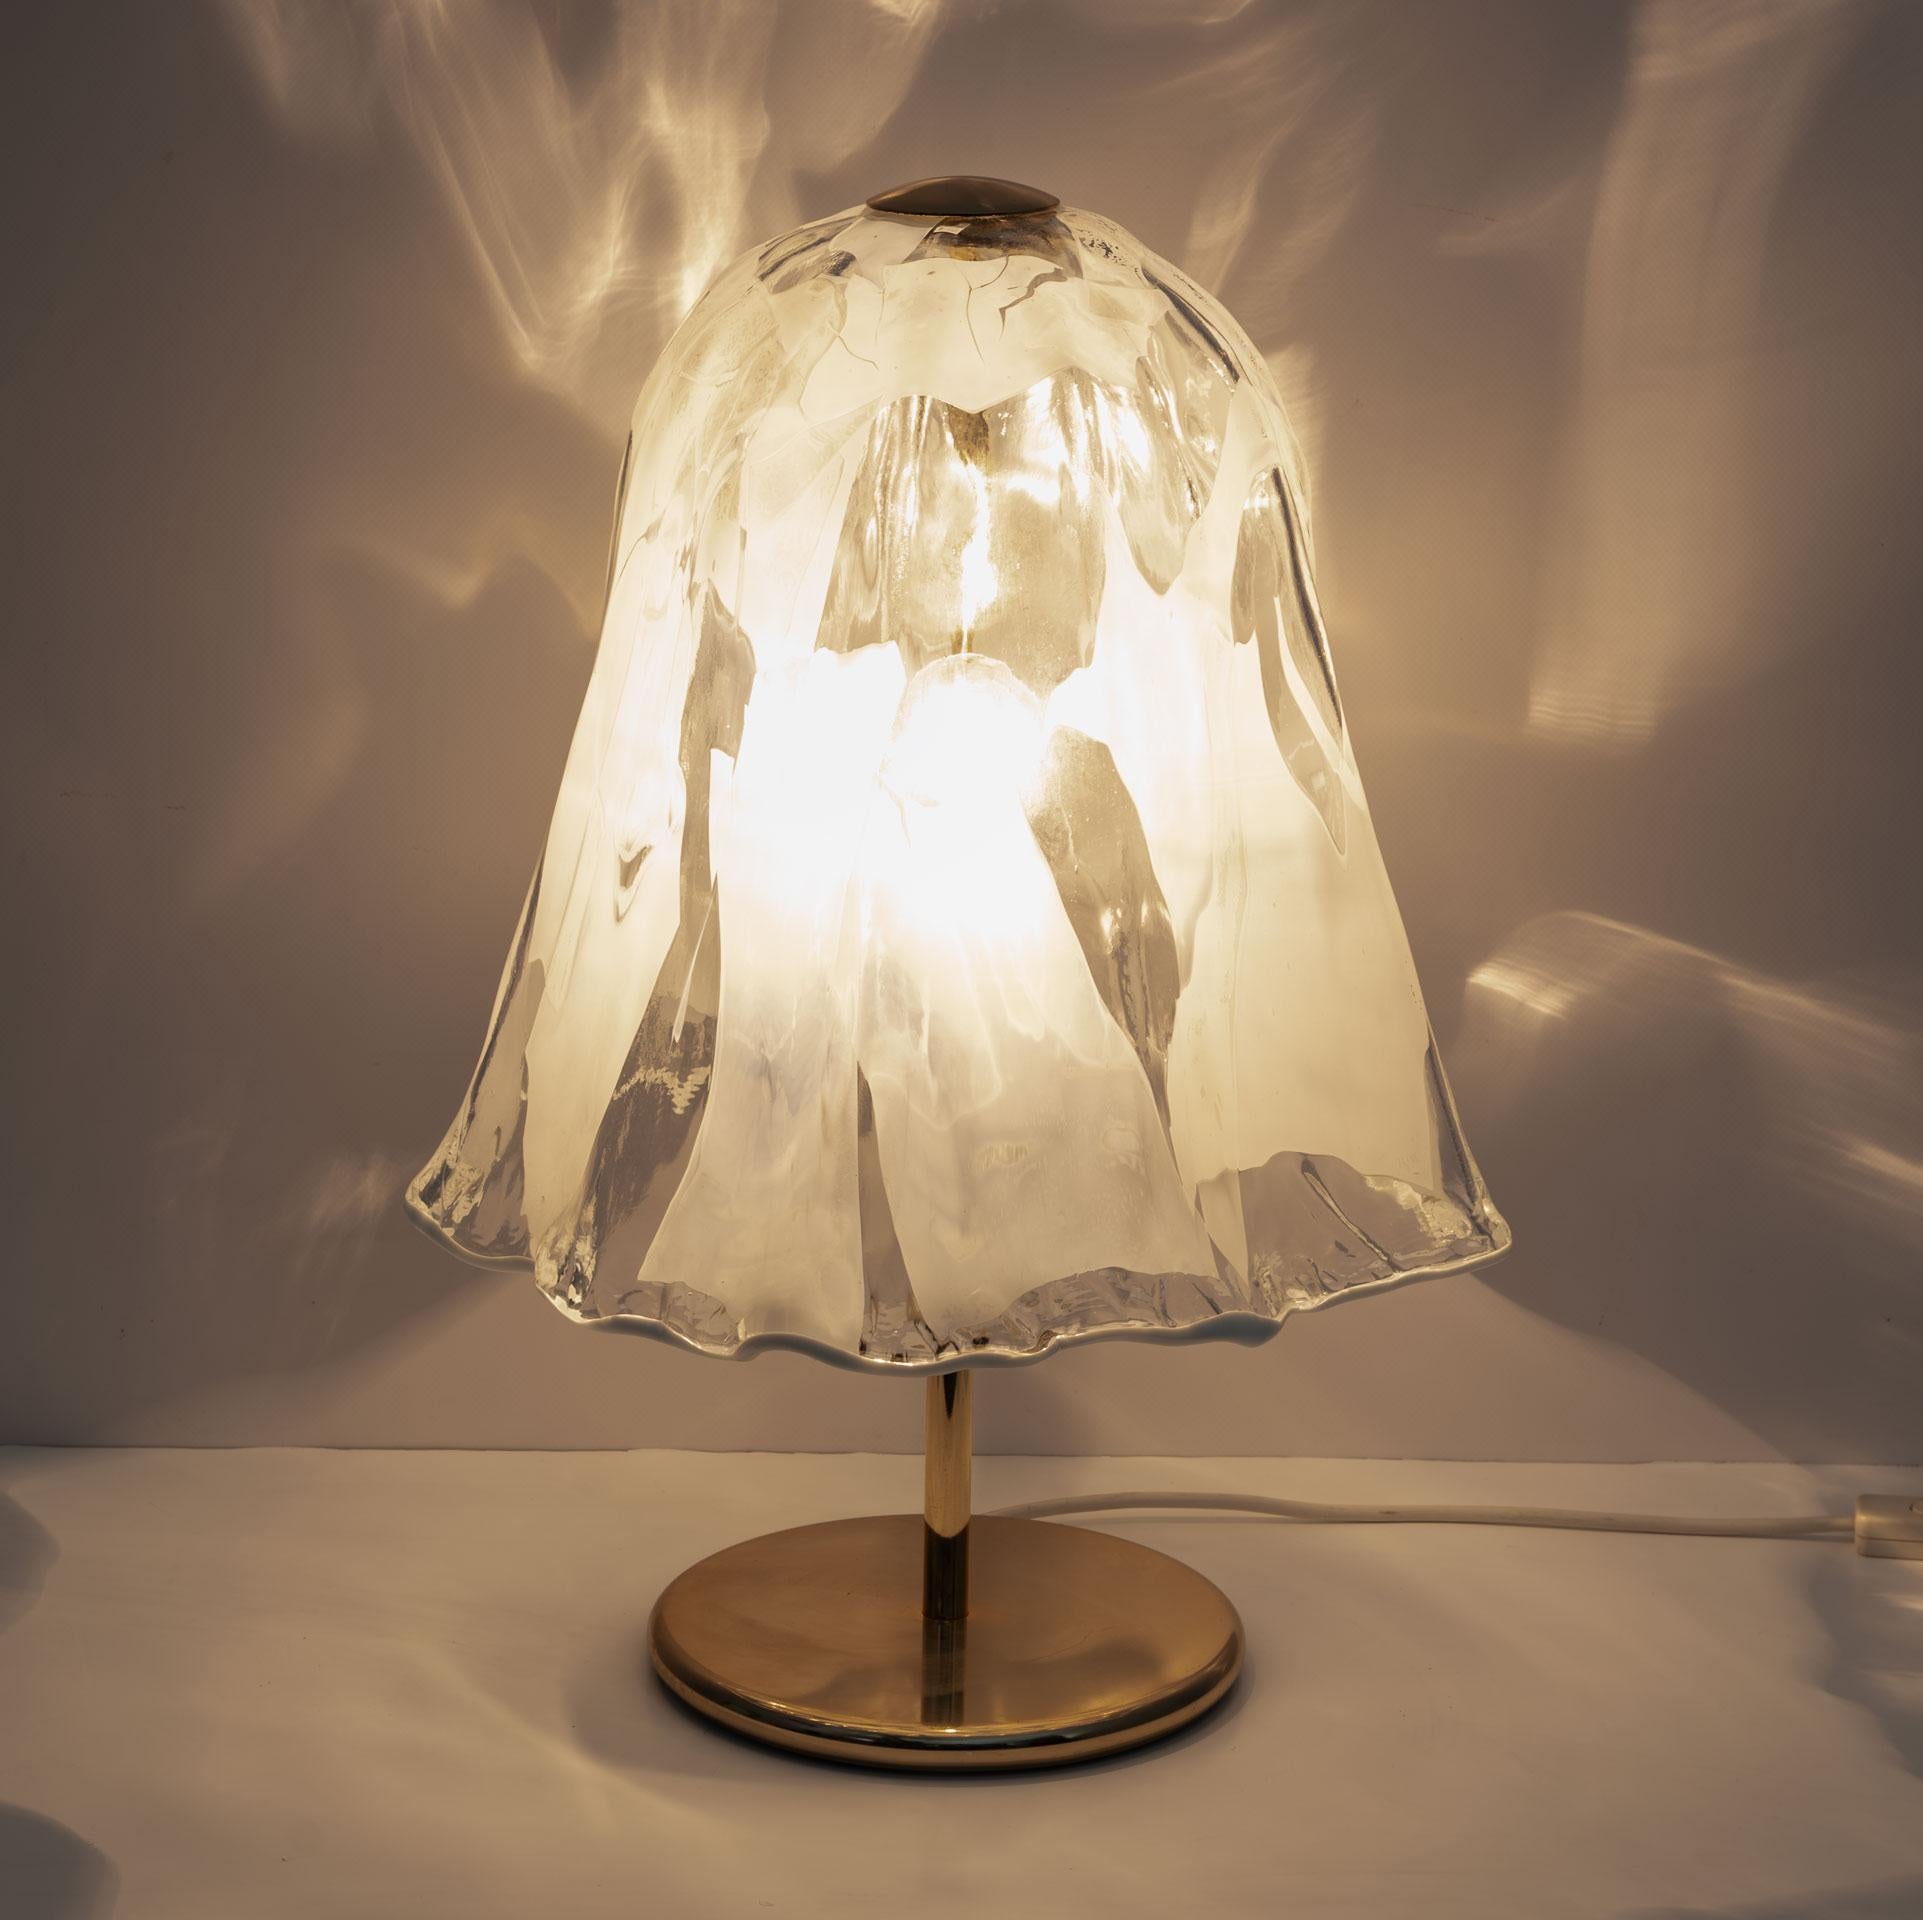 Table lamp by the renowned La Murrina, made in the artistic period of the 70s. The shade of this light gracefully resembles a bell-shaped flower. It's so sweet.

This lamp not only illuminates but also proudly displays true Murano craftsmanship. The